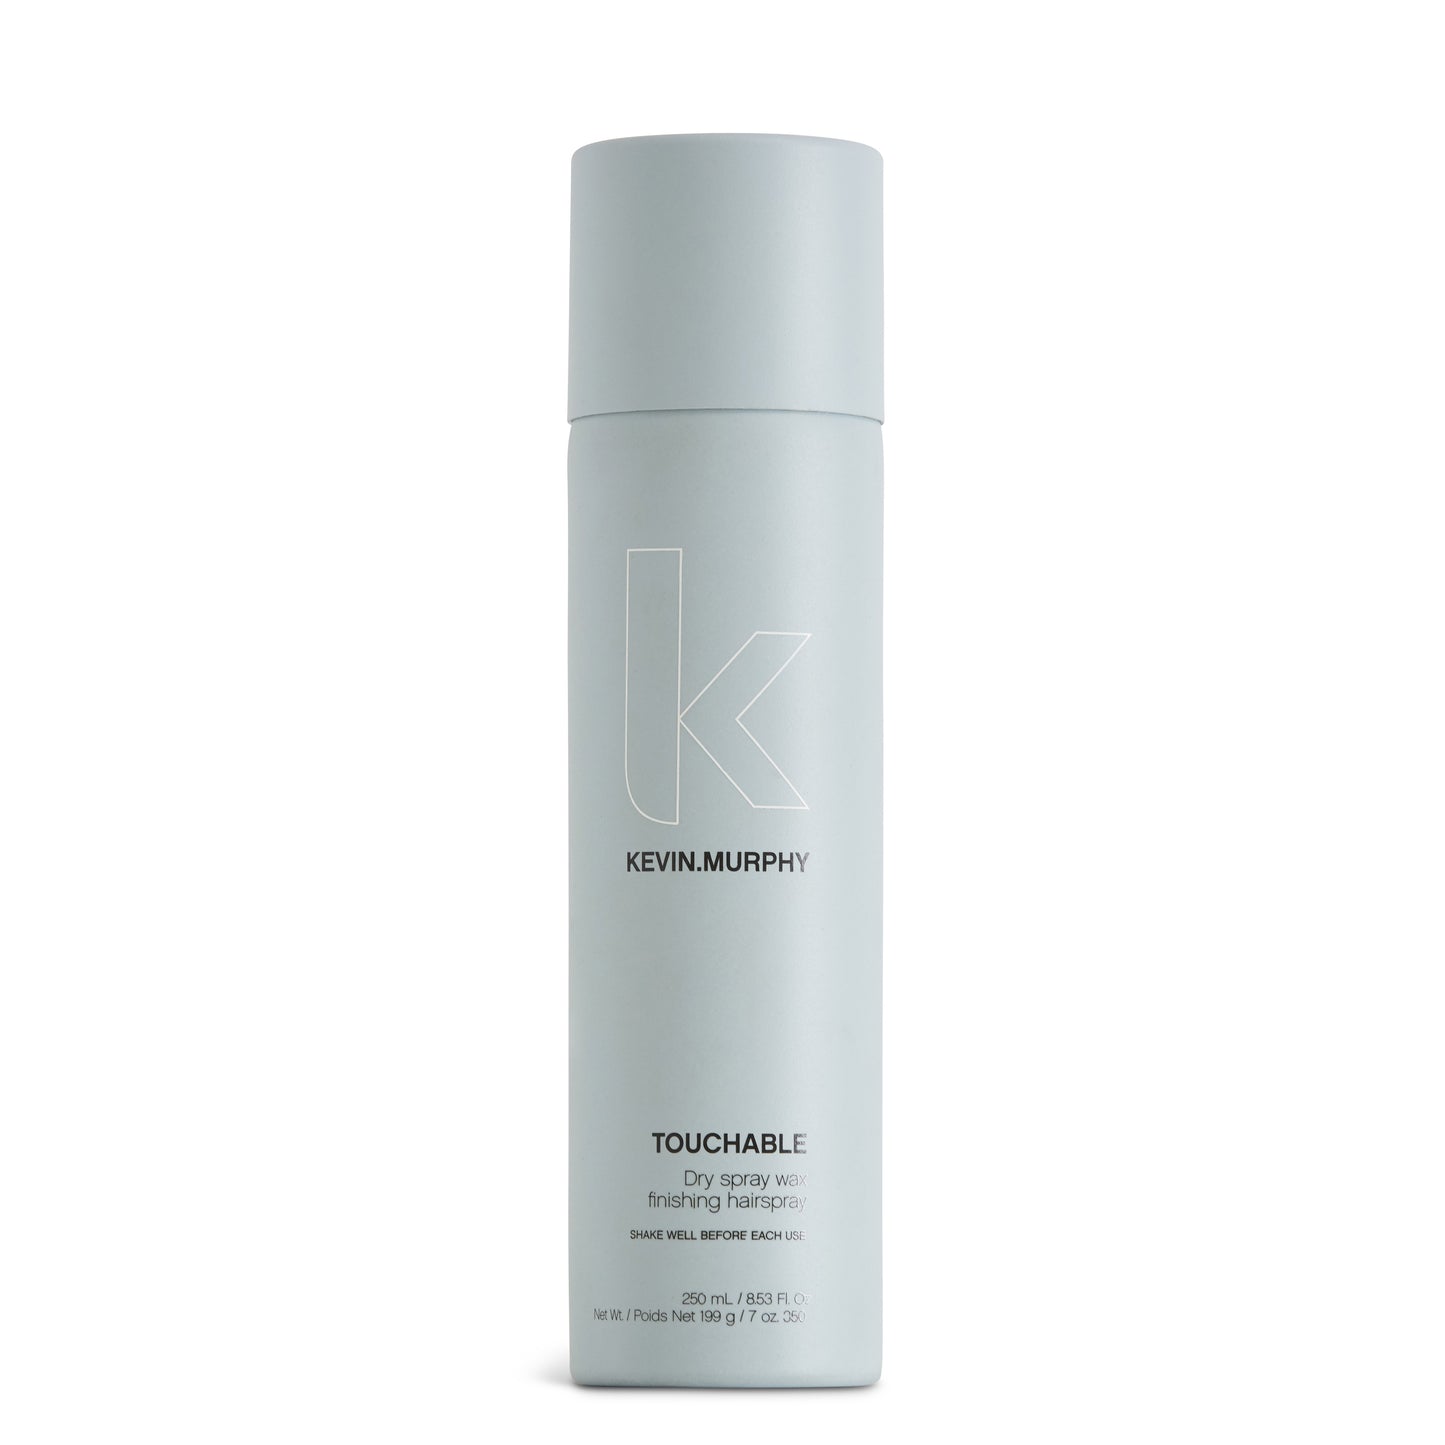 KEVIN.MURPHY - TOUCHABLE 250ml